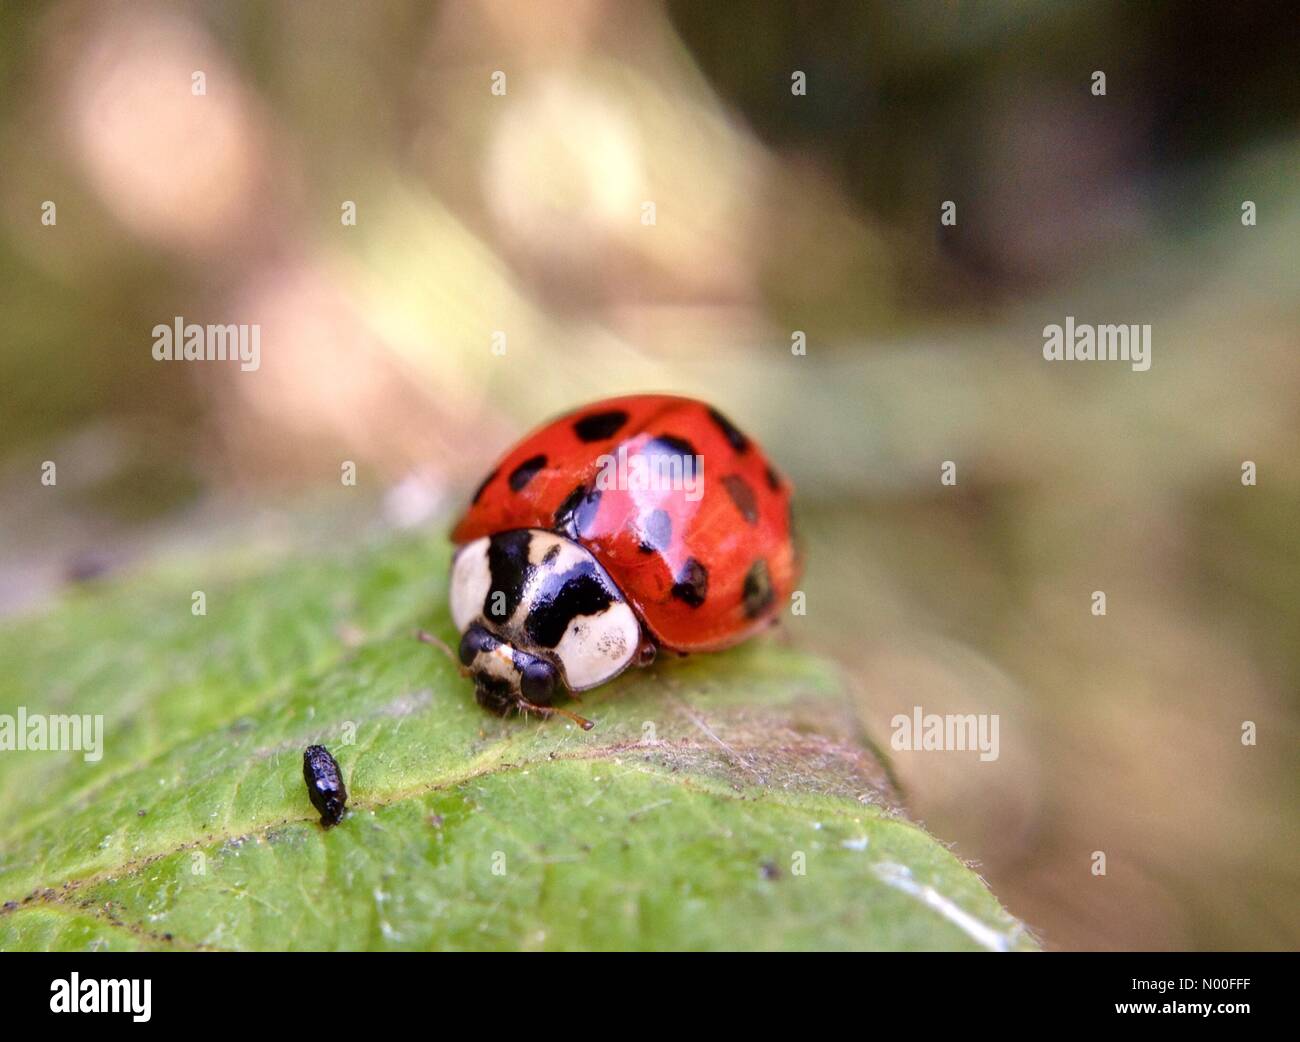 UK Weather, insects in Leeds. With another warm sunny day plenty of insects about. Ladybirds could be seen in all stages from early larva to adult. Taken on the 26th June 2017 in Leeds, Yorkshire. Stock Photo